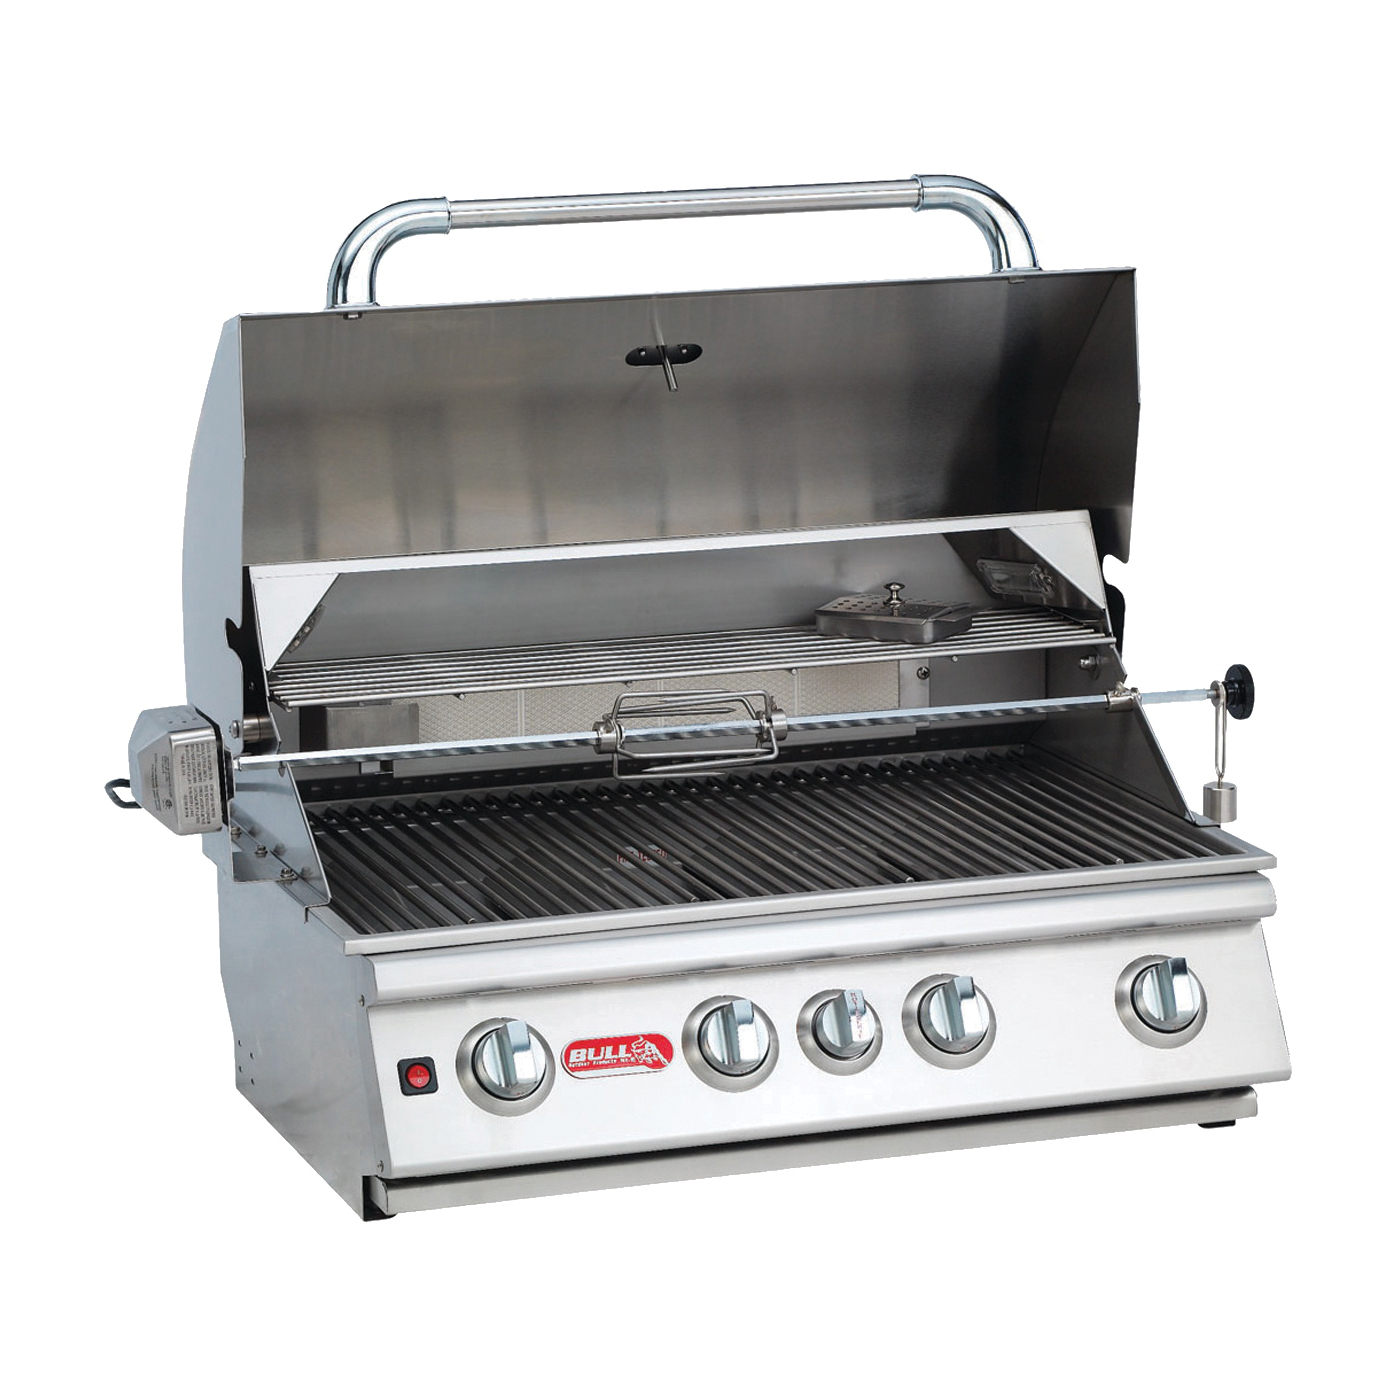 Angus 47629 Gas Grill Head, 75000 Btu BTU, Natural Gas, 4 -Burner, 210 sq-in Secondary Cooking Surface